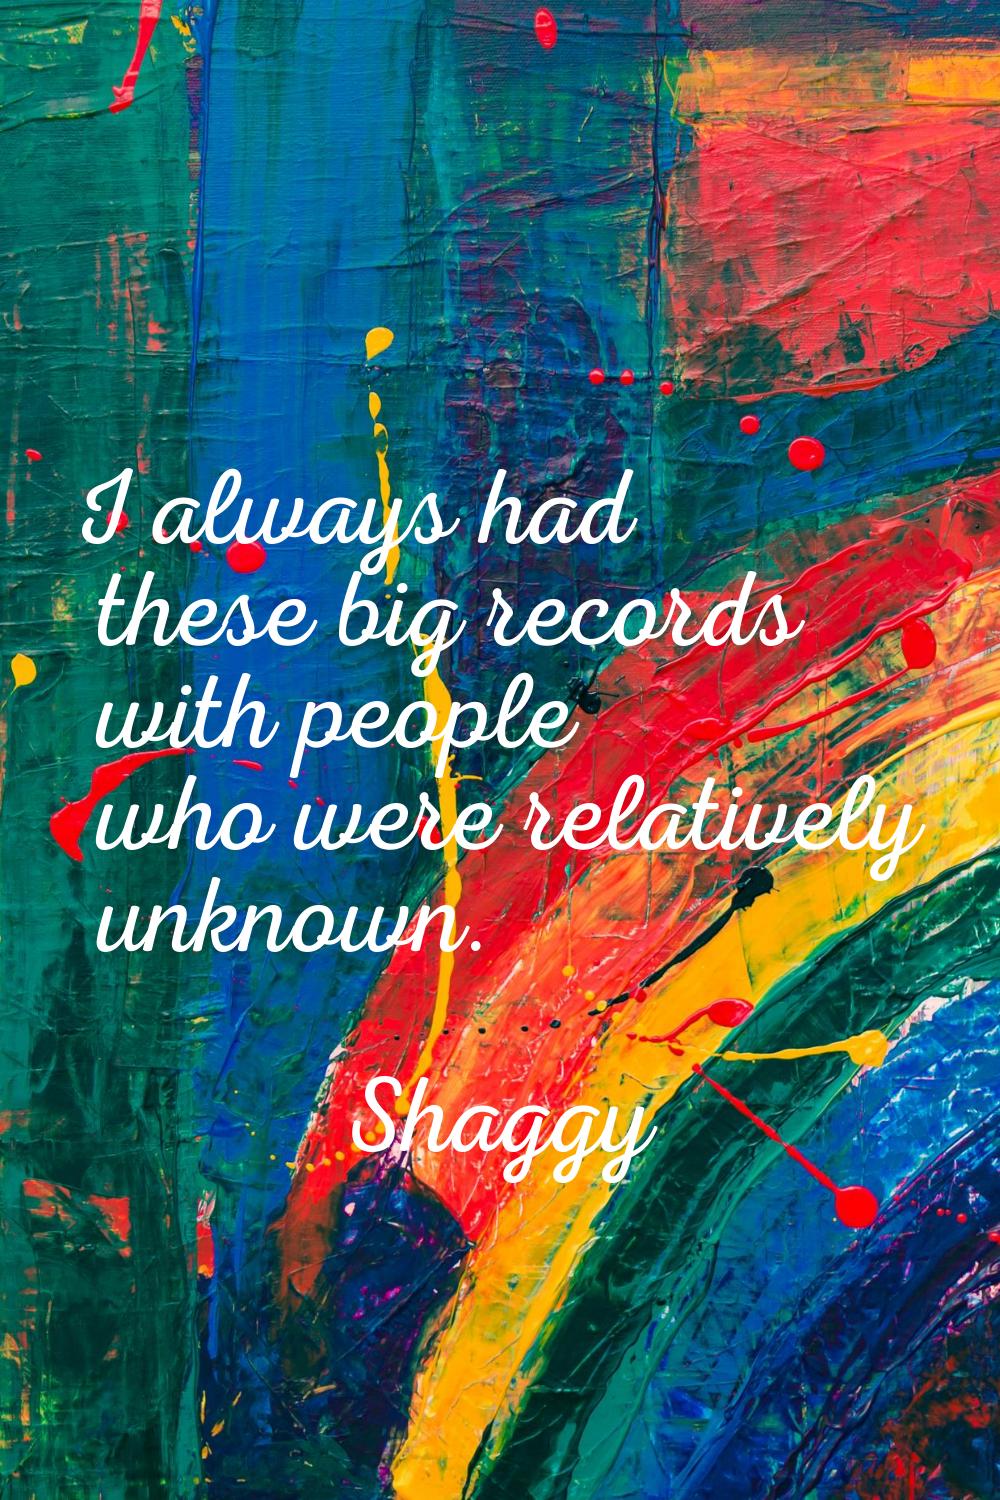 I always had these big records with people who were relatively unknown.